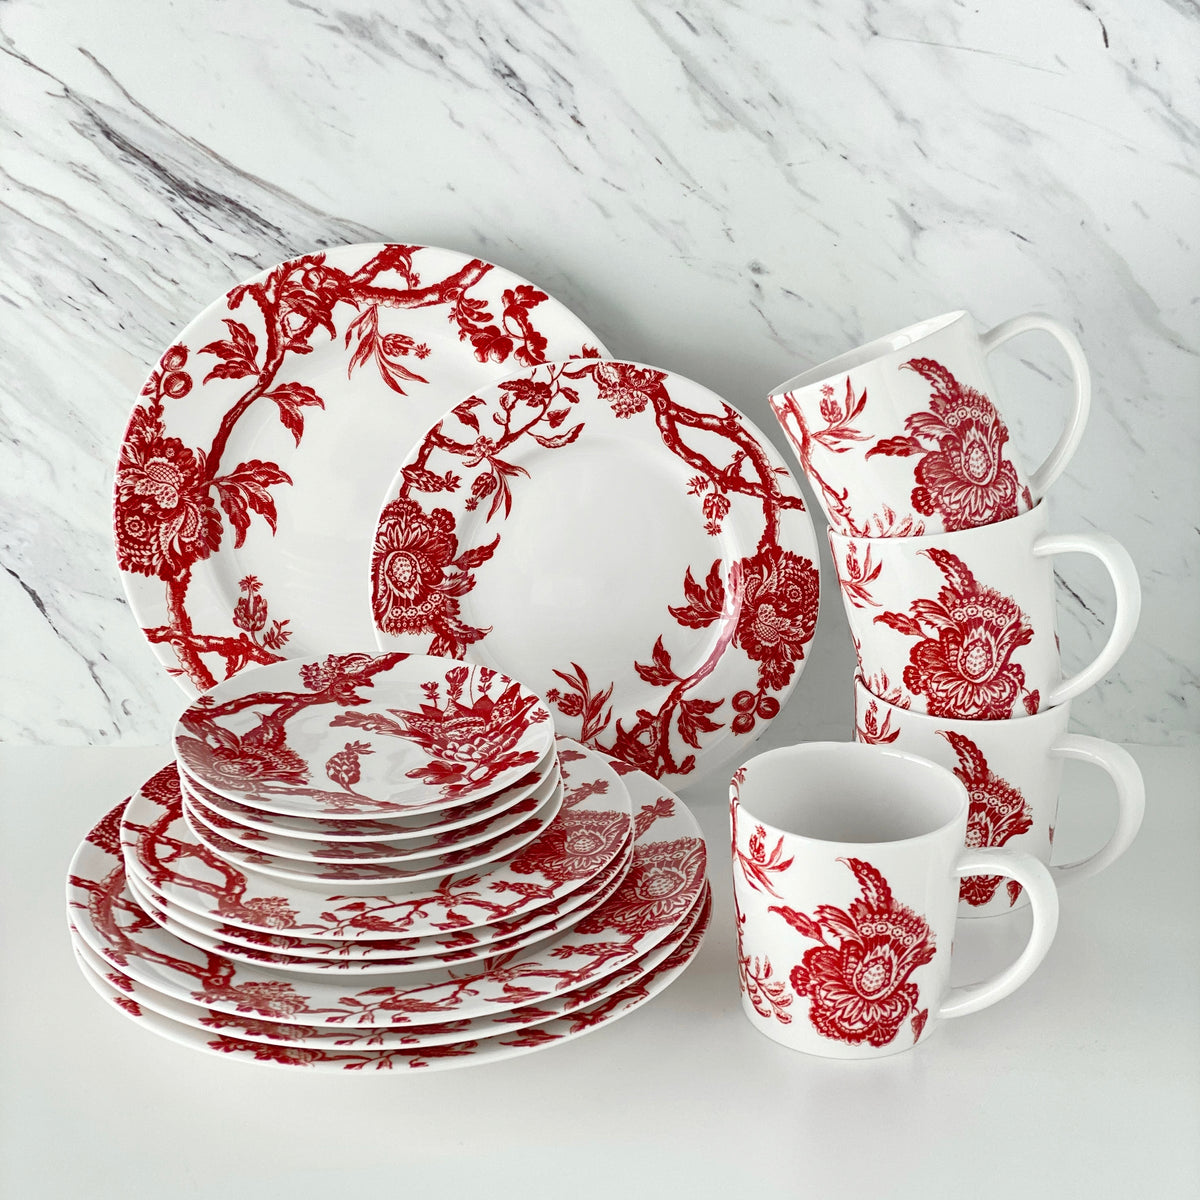 The red and white porcelain Arcadia Crimson 16 Piece Dinnerware Set from Caskata includes 4 each of salad, dinner and canape plates as well as four wide mouth mugs.